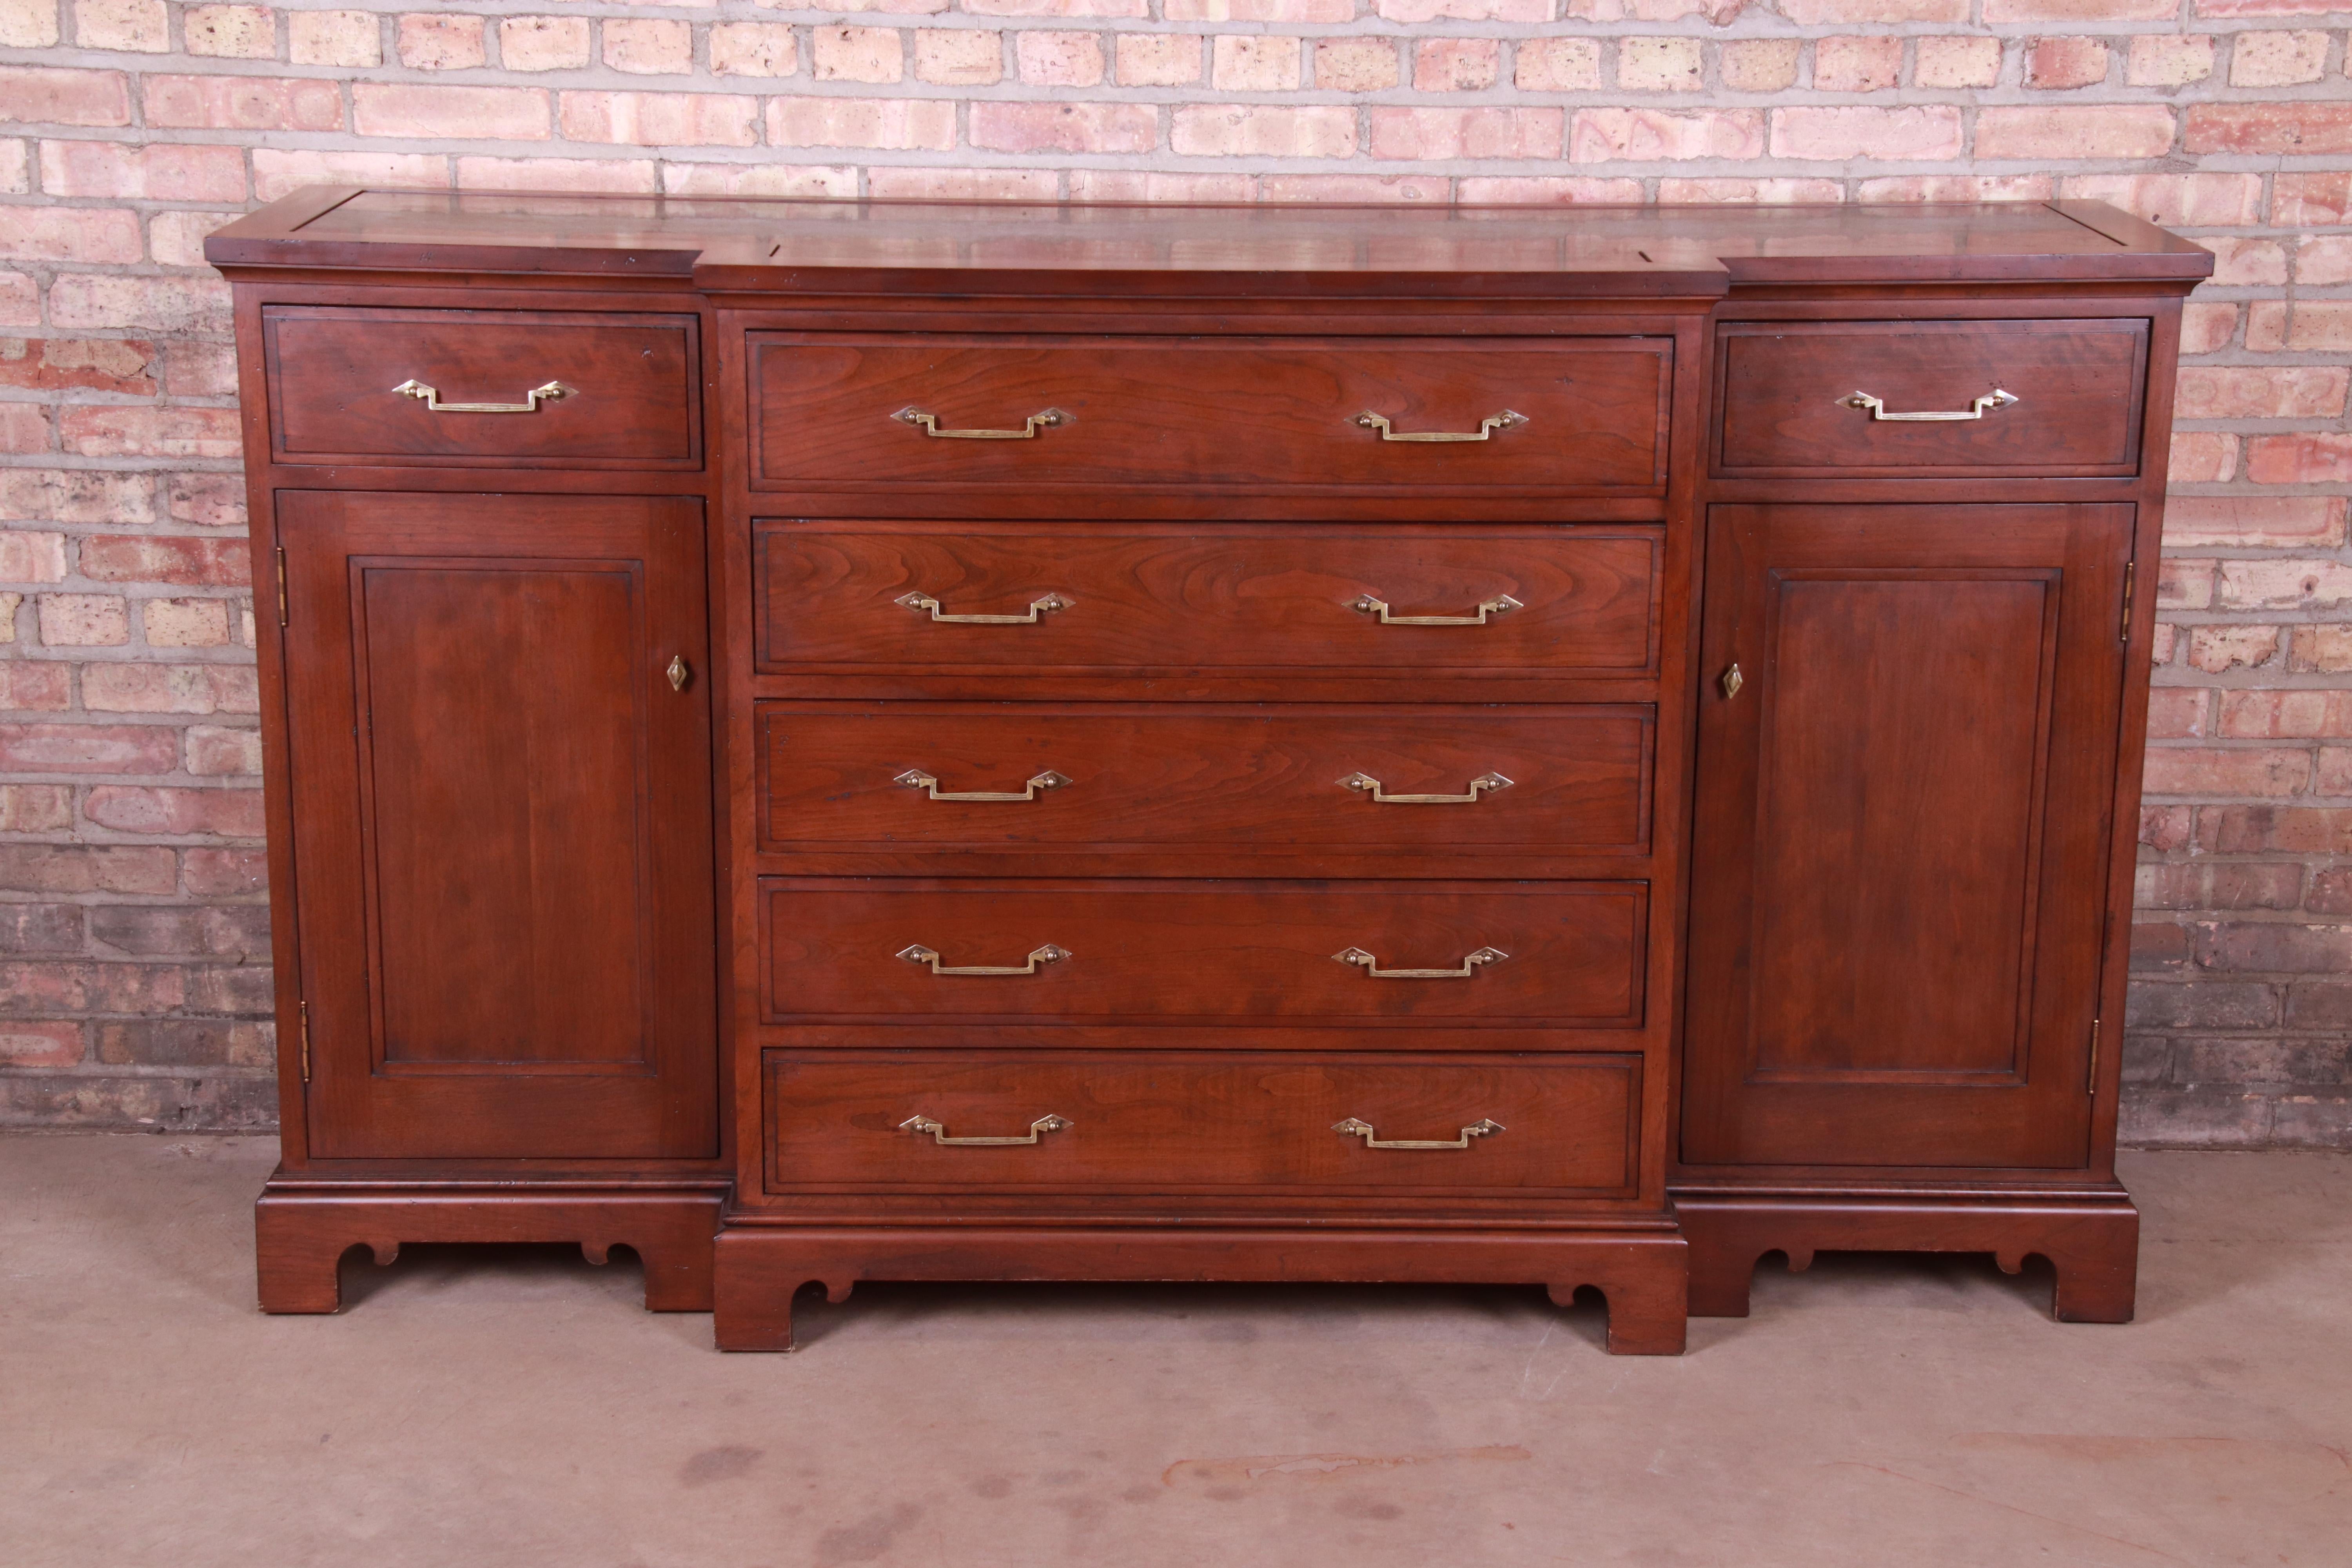 An exceptional French Provincial breakfront sideboard credenza or bar cabinet

Attributed to Grange

Late 20th century

Solid mahogany, with inset marble top, original brass hardware, and felt-lined drawers.

Measures: 74